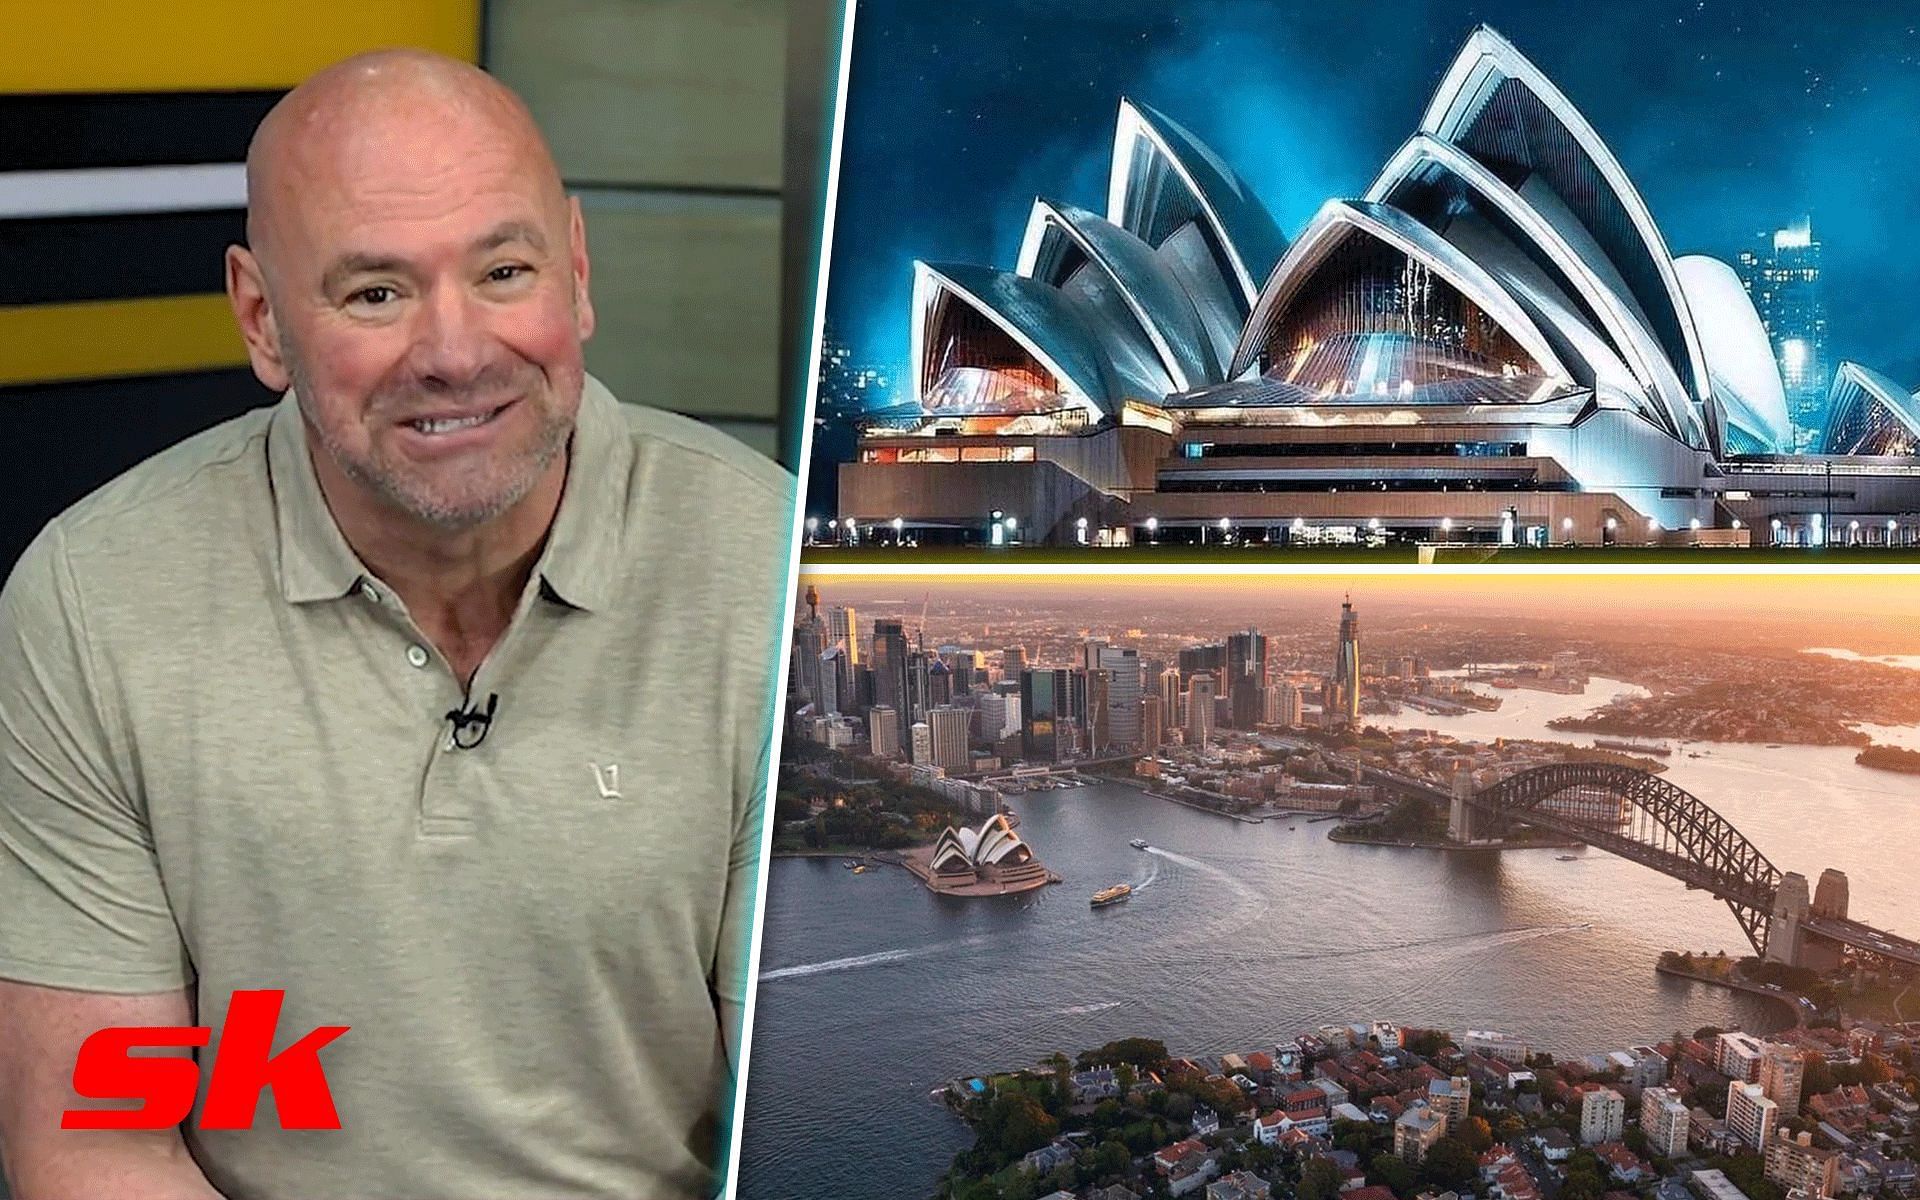 Dana White (left) and Sydney City (right) [Image credits: Getty Images and @EscapeDreams &amp; @sydney_sider on Twitter]